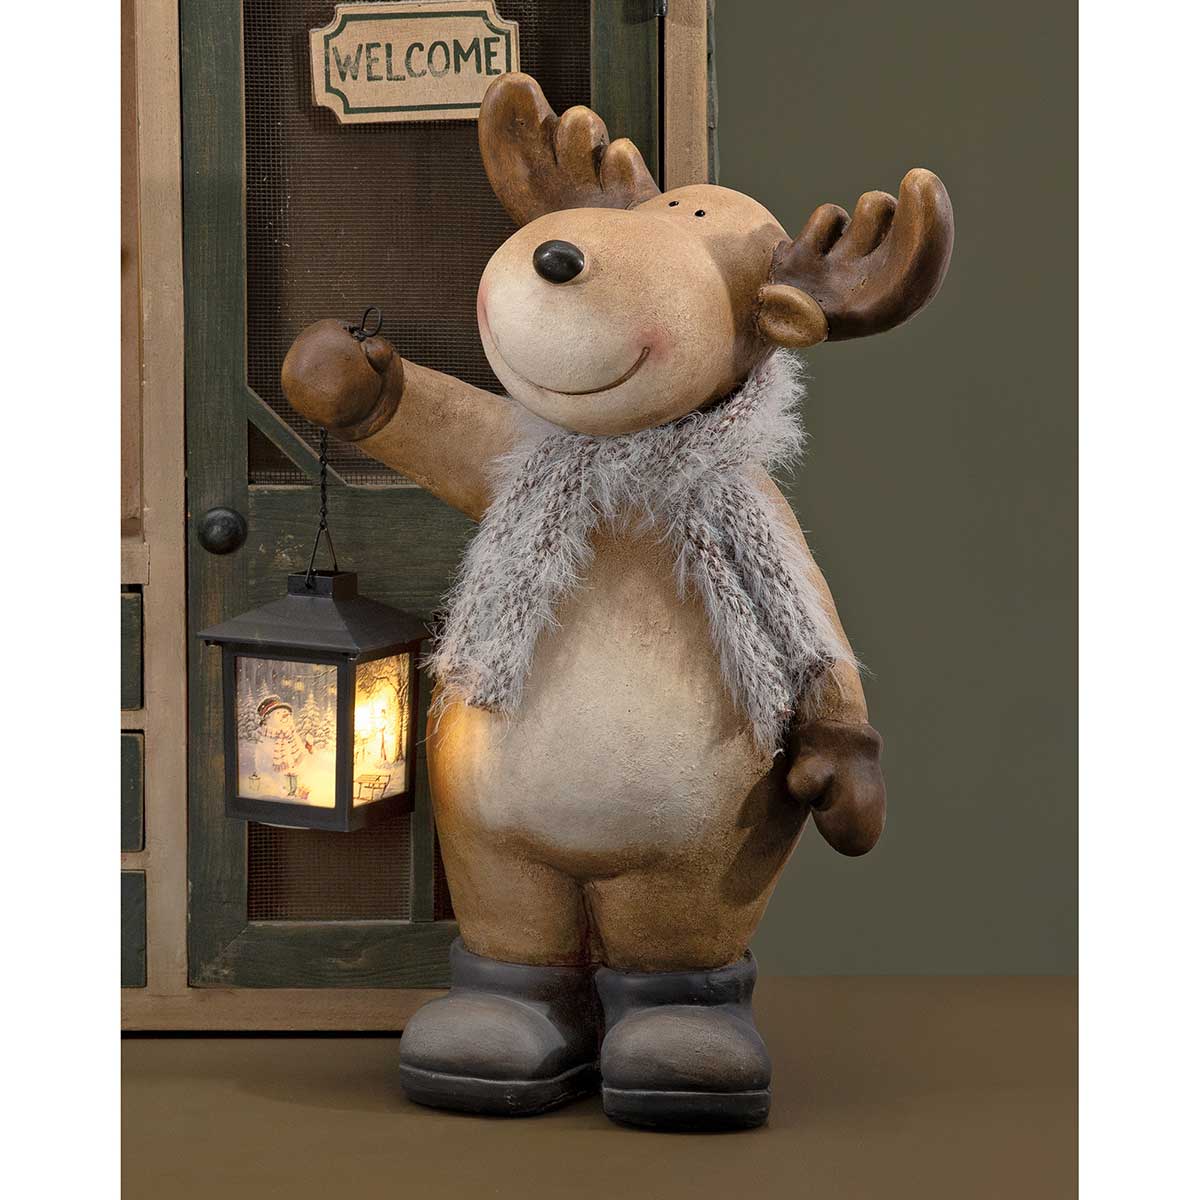 MERRITT MOOSE RESIN MOOSE WITH SCARF AND 4"X3" LED LANTERN